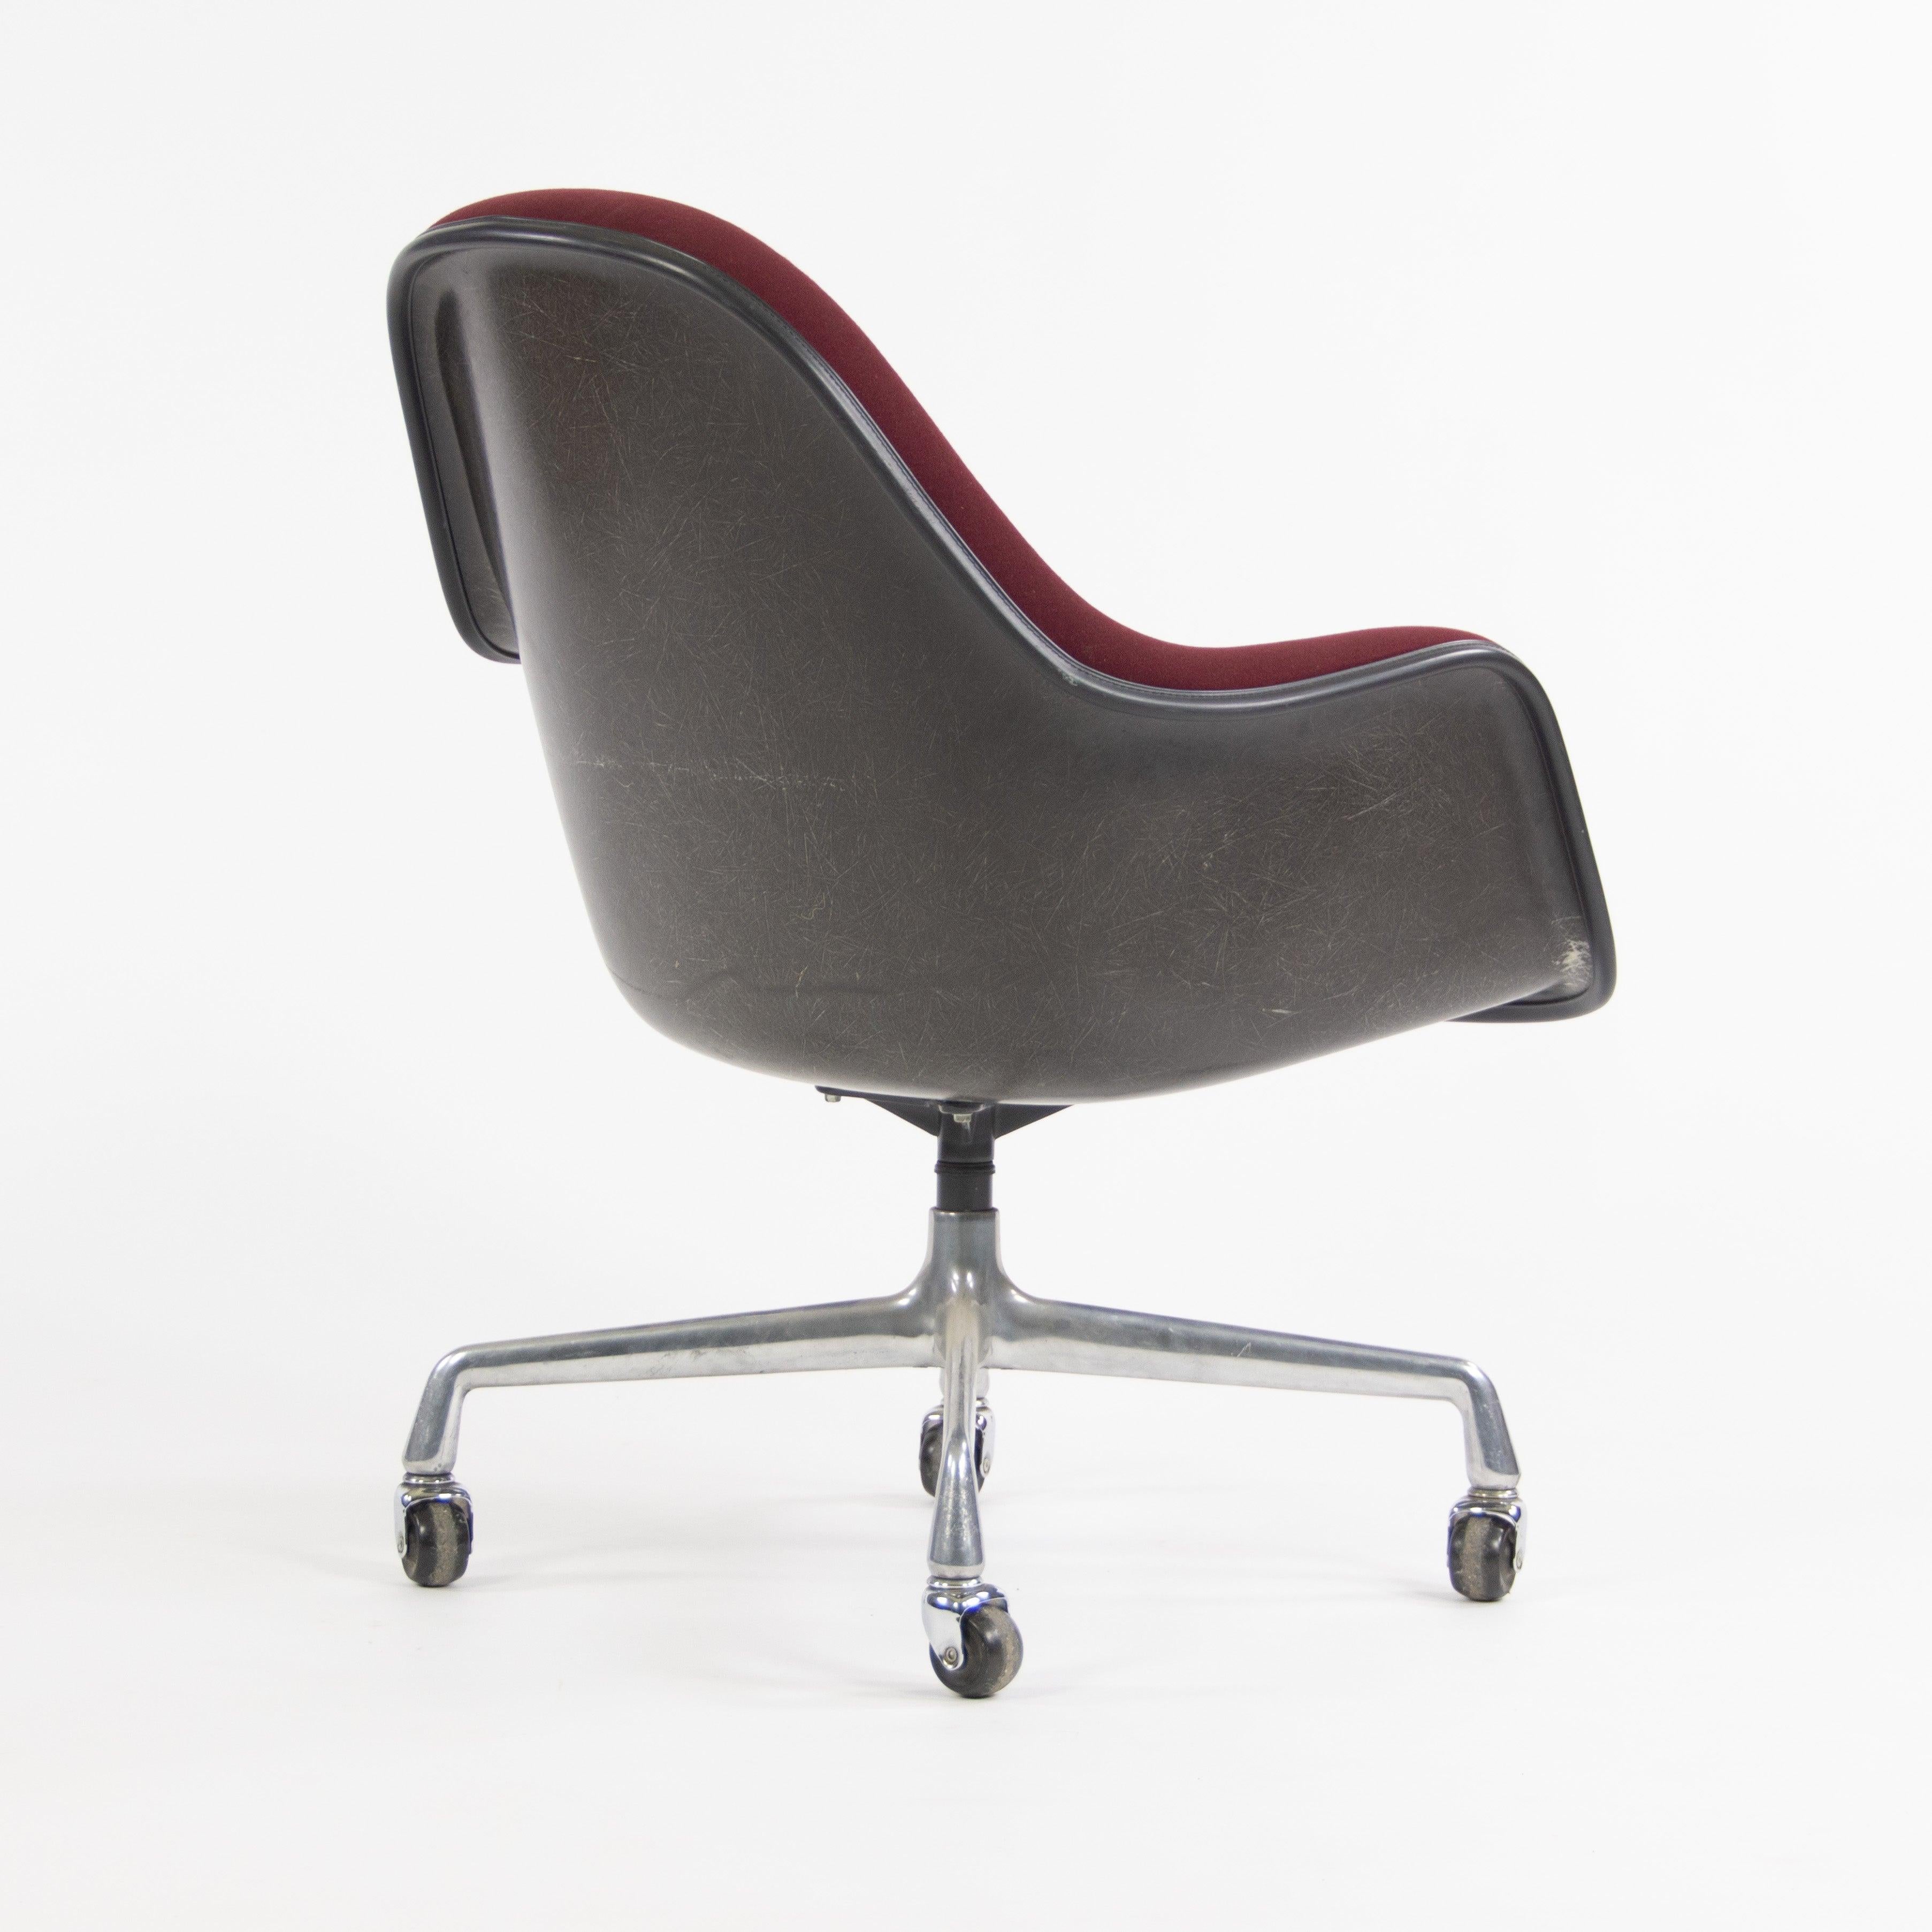 1985 Eames Herman Miller EC175 Upholstered Fiberglass Shell Chair Museum Quality In Good Condition For Sale In Philadelphia, PA